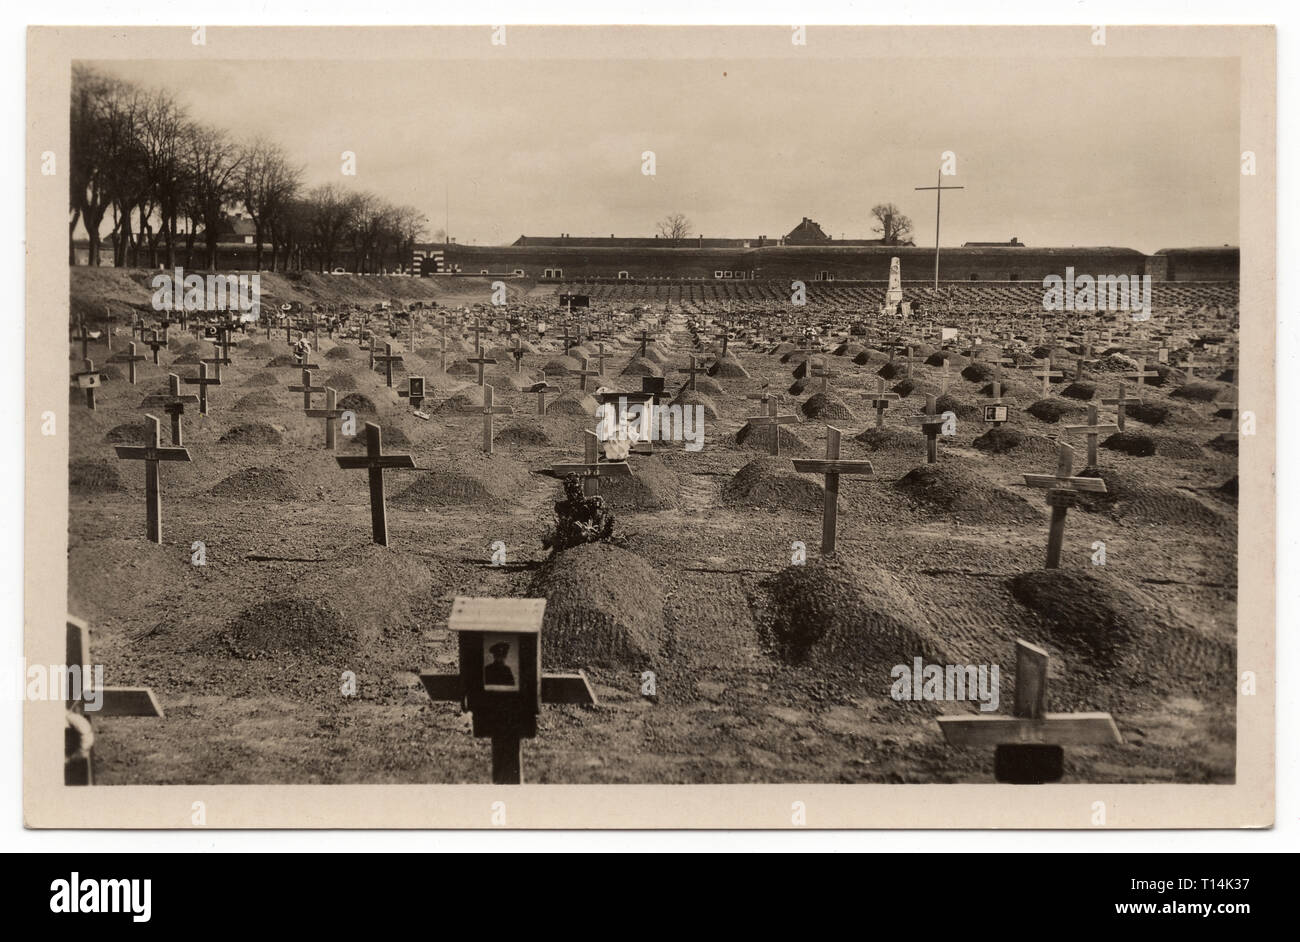 National Cemetery (Národní hřbitov) near the Theresienstadt Small Fortress (Malá pevnost) in Terezín, Czechoslovakia, depicted in the Czechoslovak vintage postcard issued in 1945. Courtesy of the Azoor Postcard Collection. Stock Photo